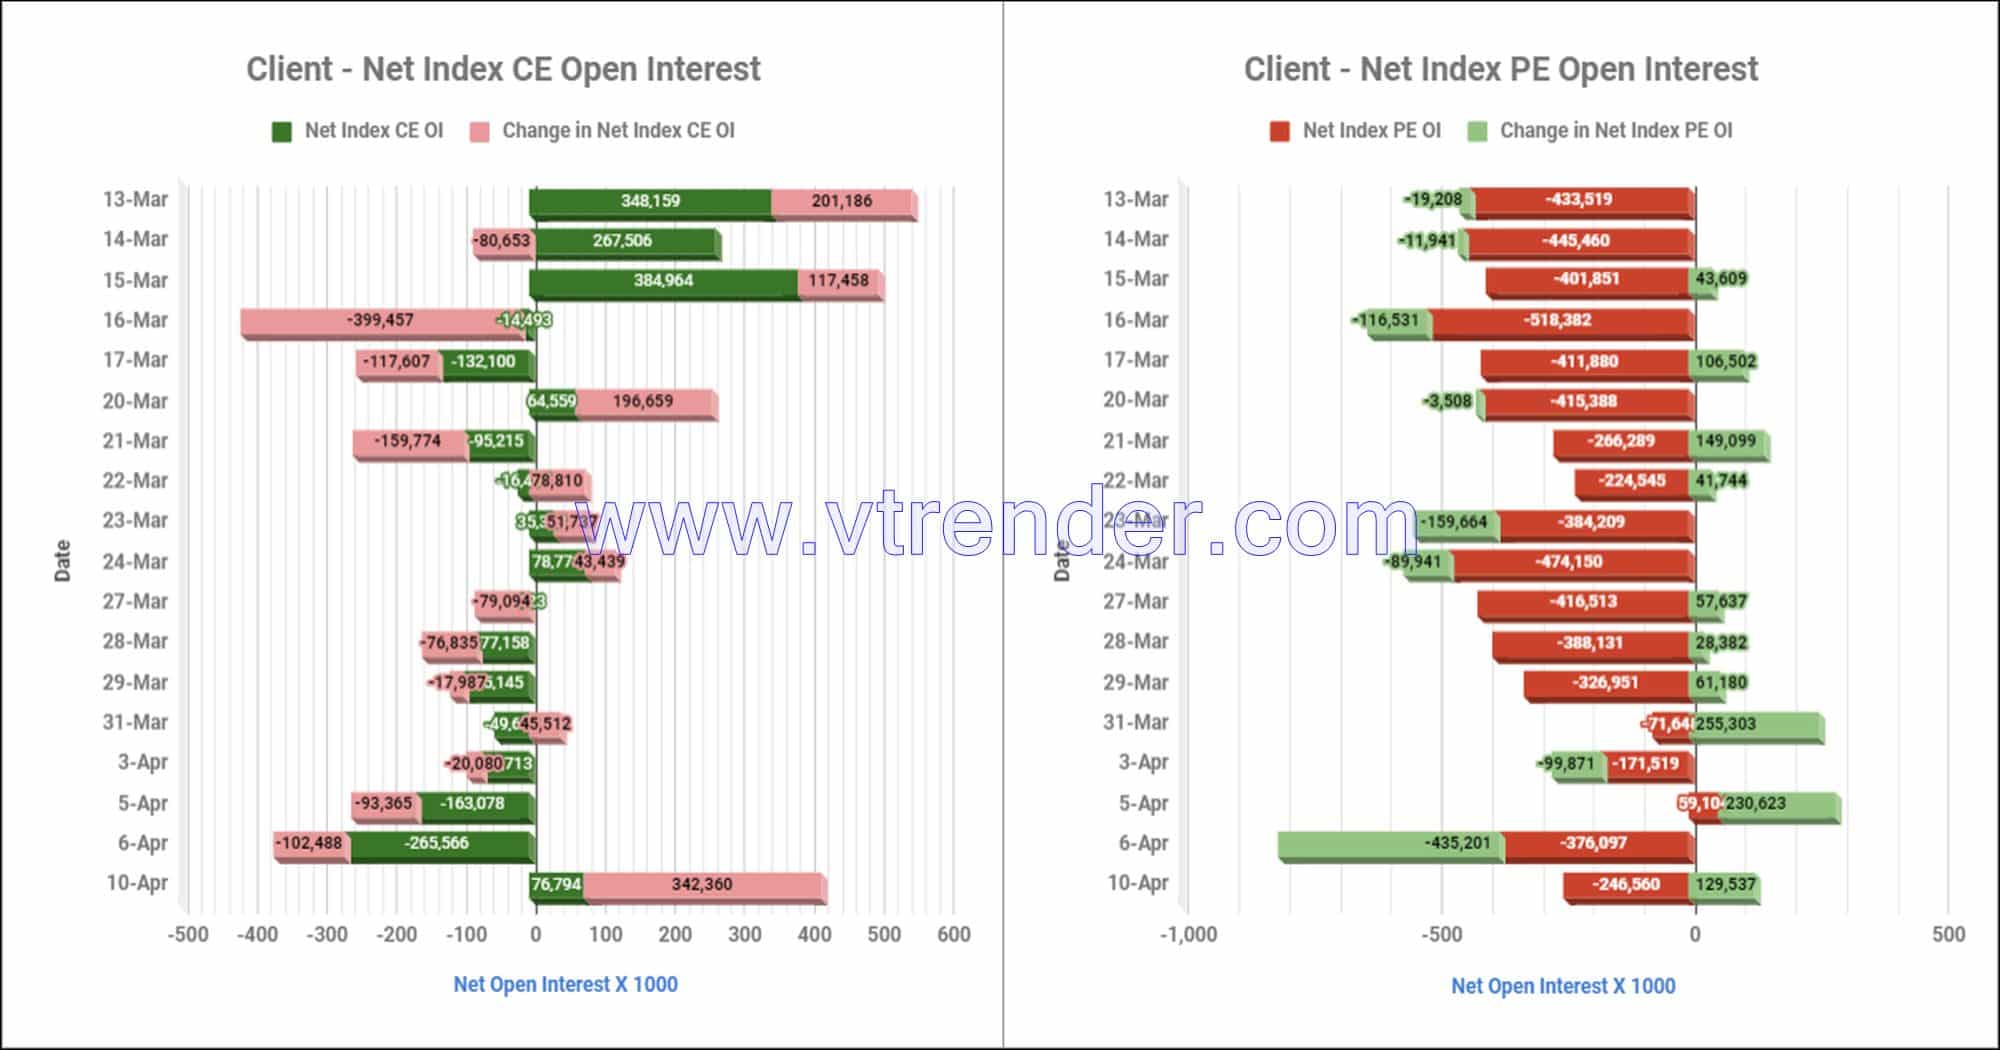 Clientinop10Apr Participantwise Net Open Interest And Net Equity Investments – 10Th Apr 2023 Client, Equity, Fii, Index Futures, Index Options, Open Interest, Prop